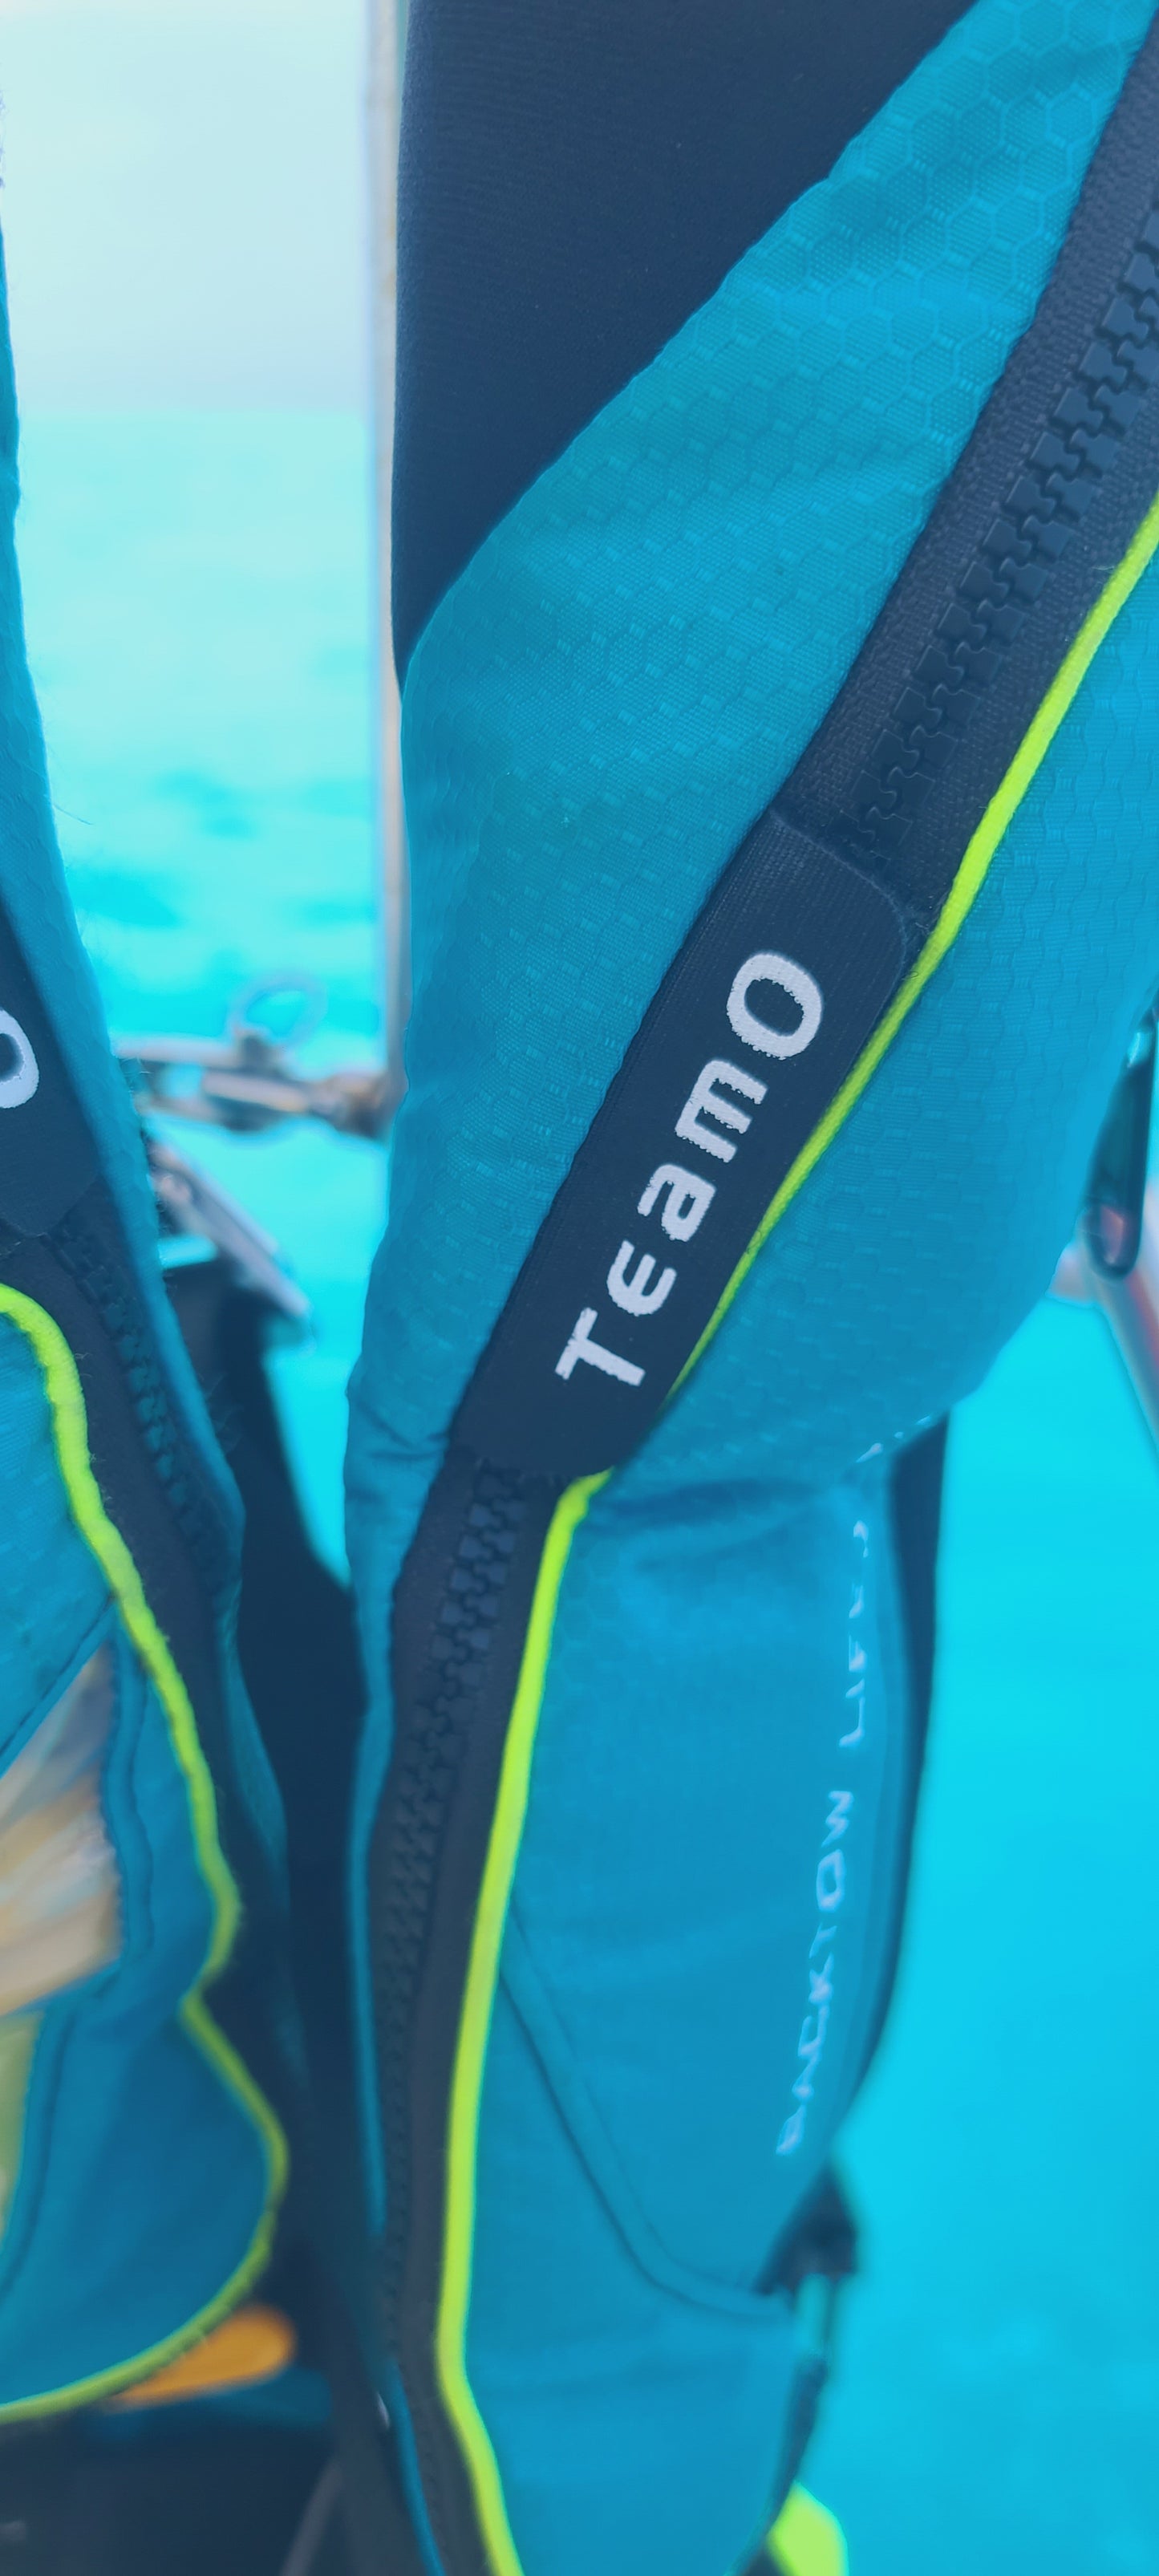 TeamO pfd with blue and neon green trim